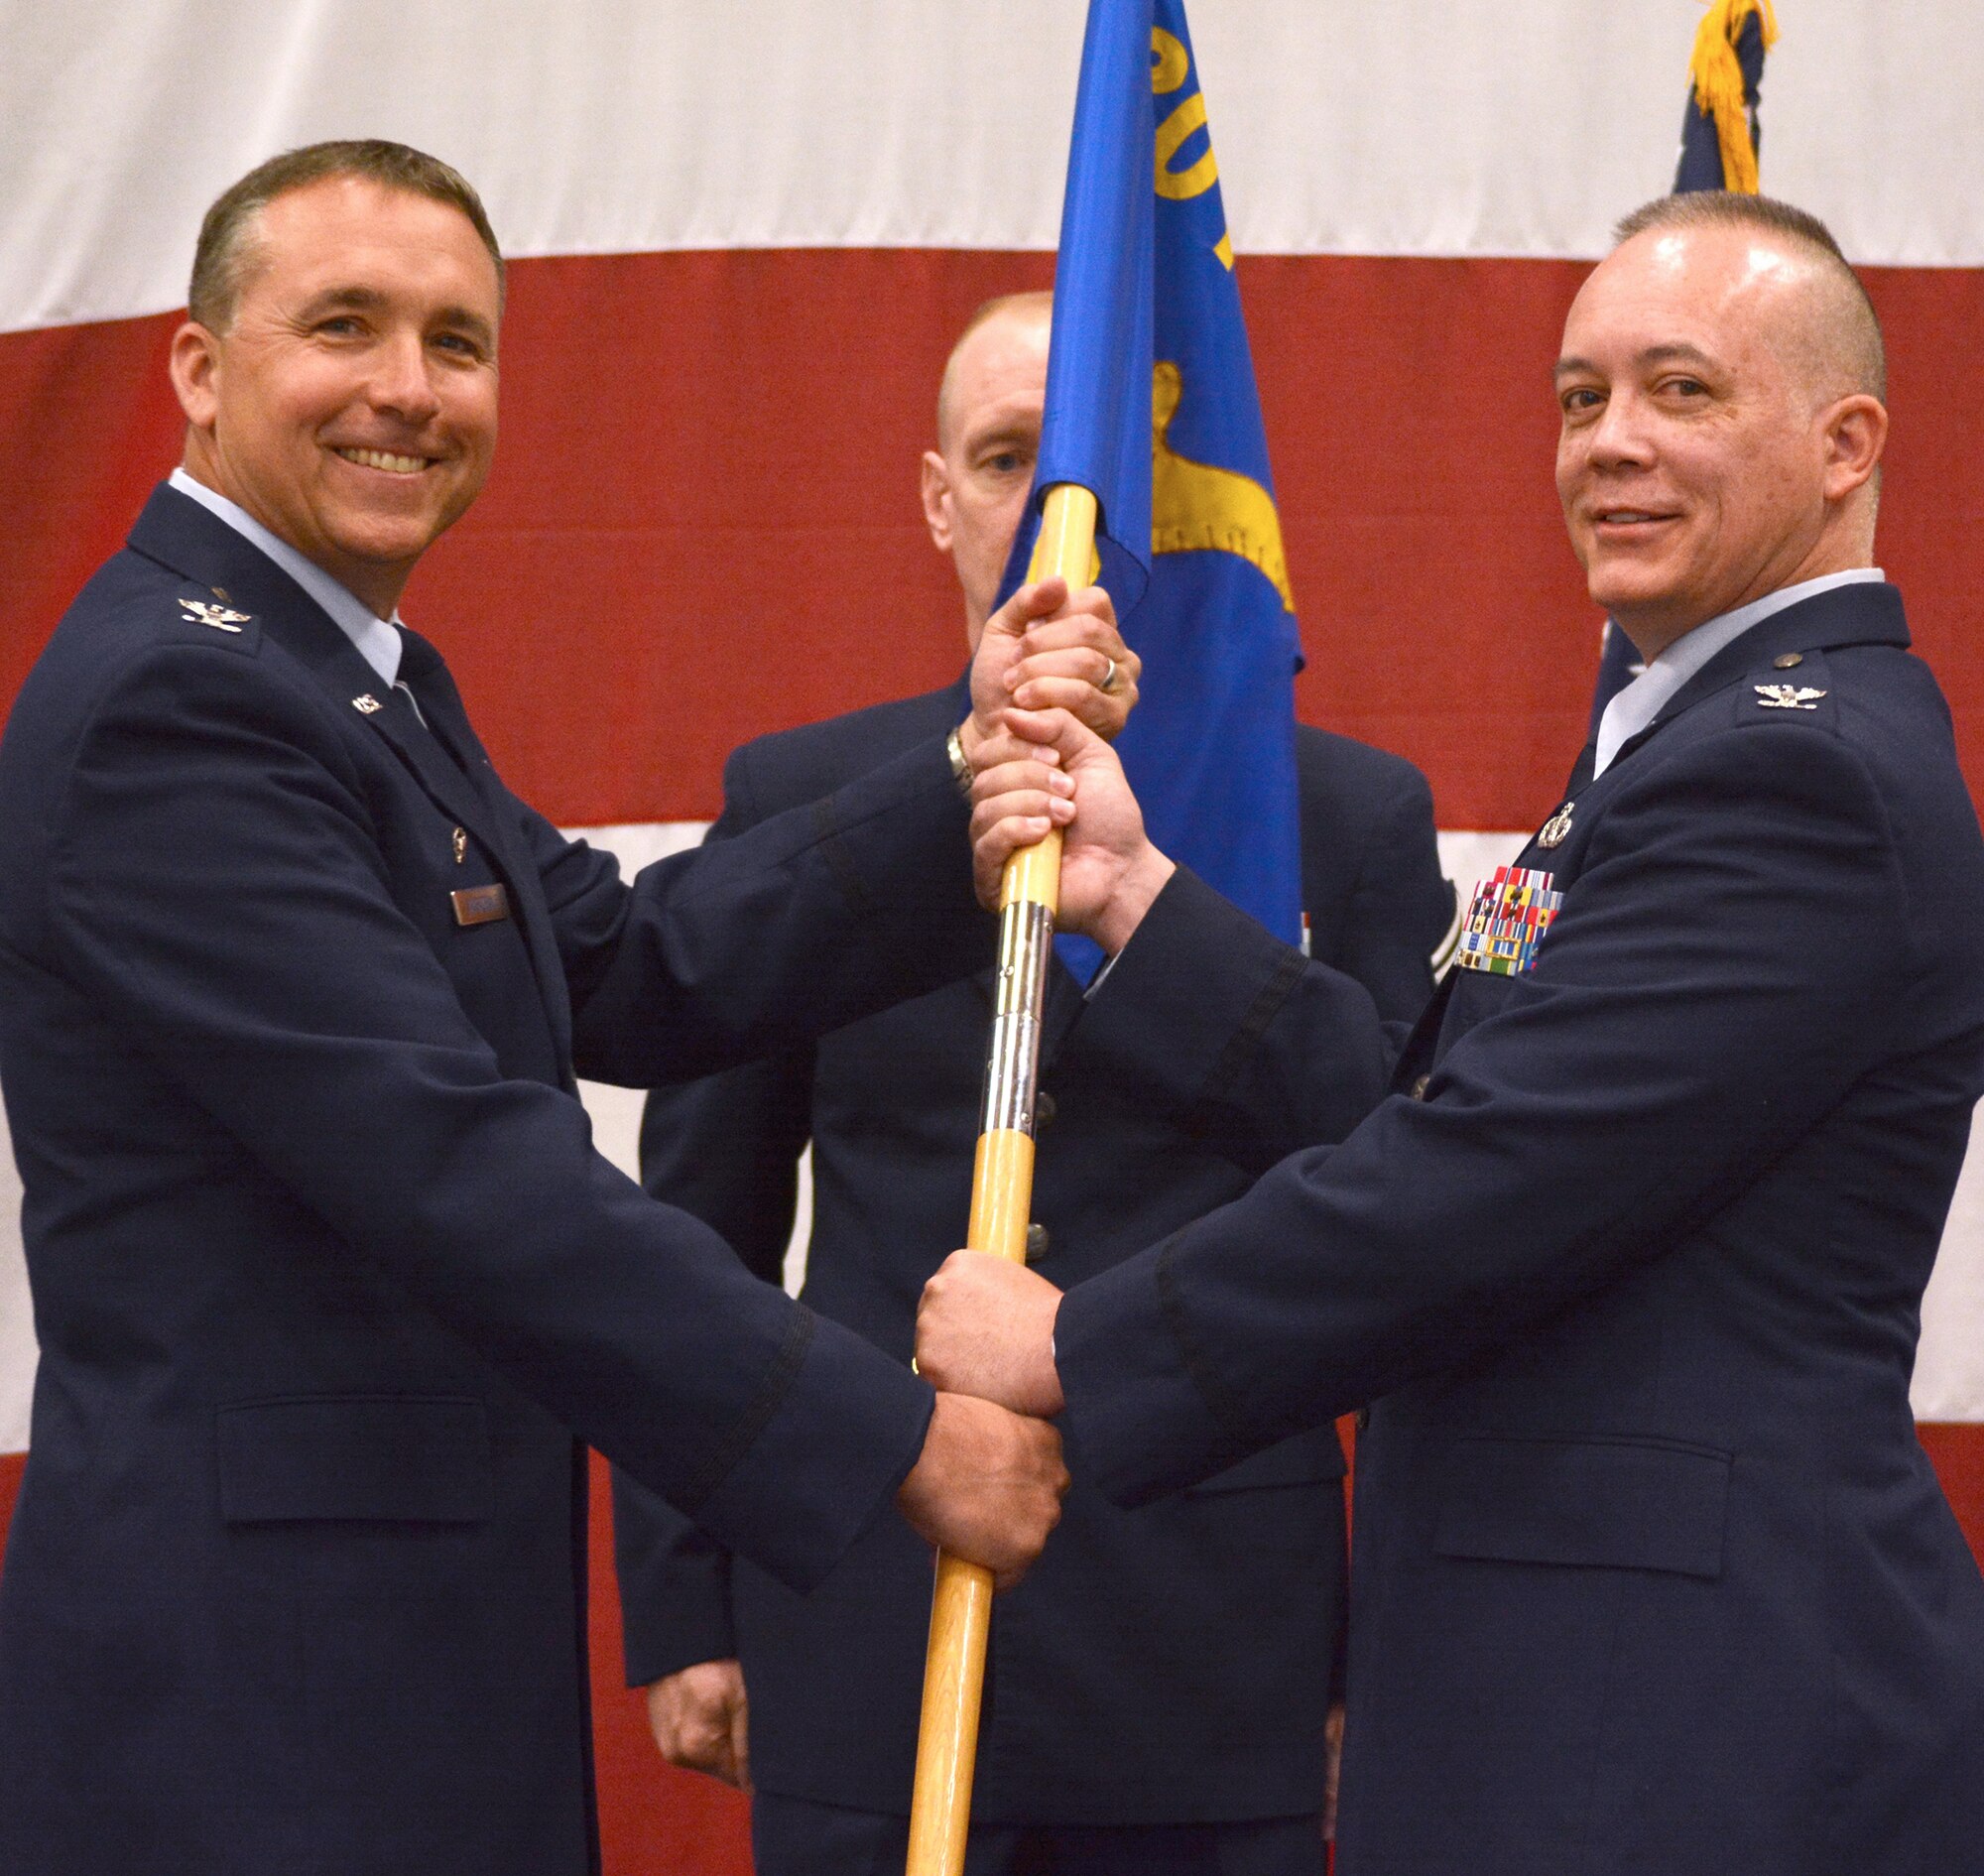 Col. John Breazeale, 301st Fighter Wing commander, passes the Mission Support Group guideon to Col. Jeffrey Barnett,  the new MSG commander, during a recent ceremony. Col. Barnett comes to the wing from the 442nd MSG at Whiteman Air Force Base, Mo. (U.S. Air Force photo/ SSgt. Samantha Mathison)